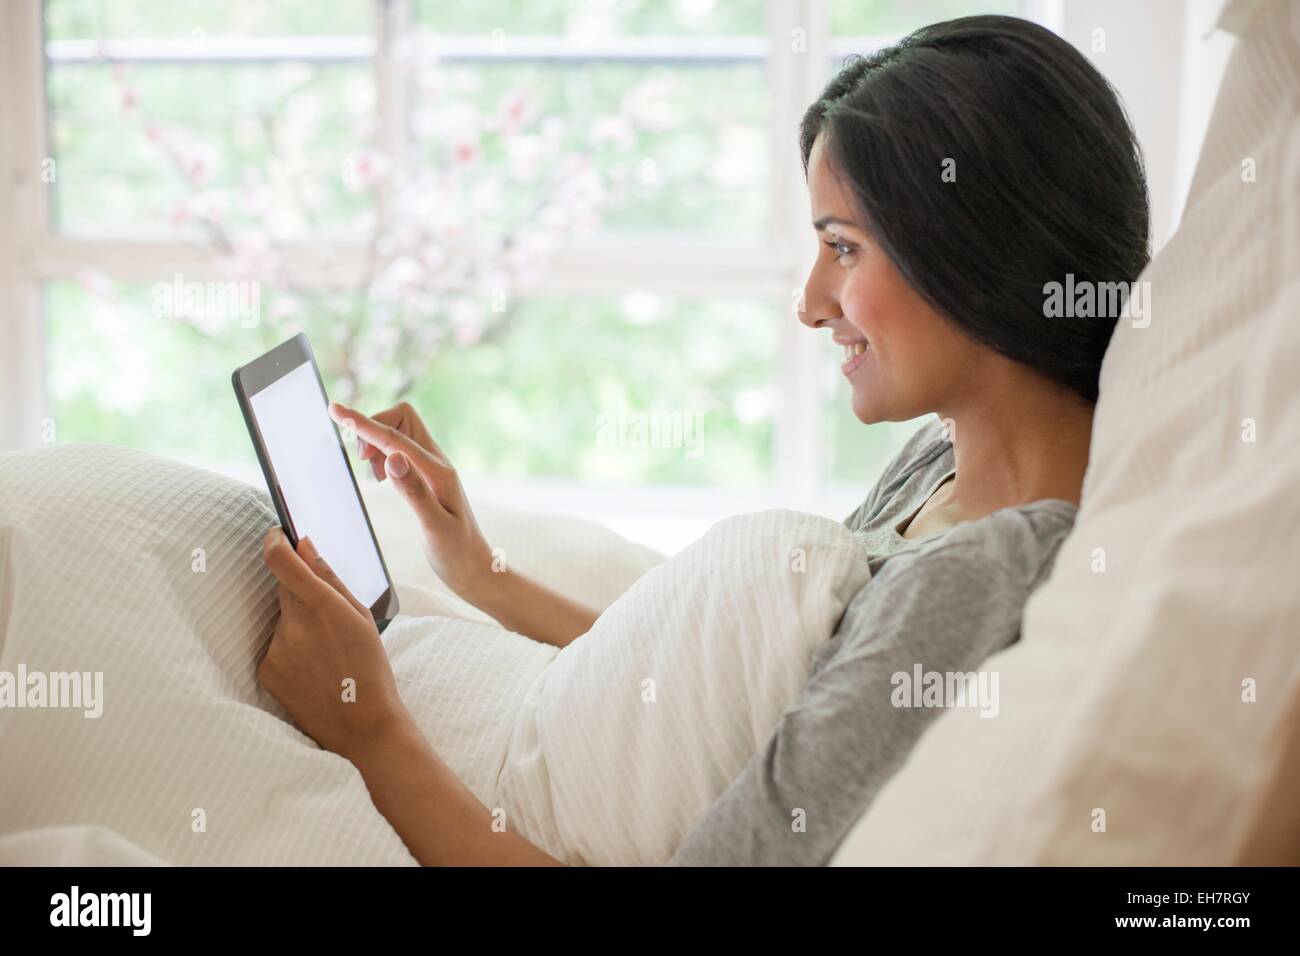 Woman in bed using digital tablet Stock Photo